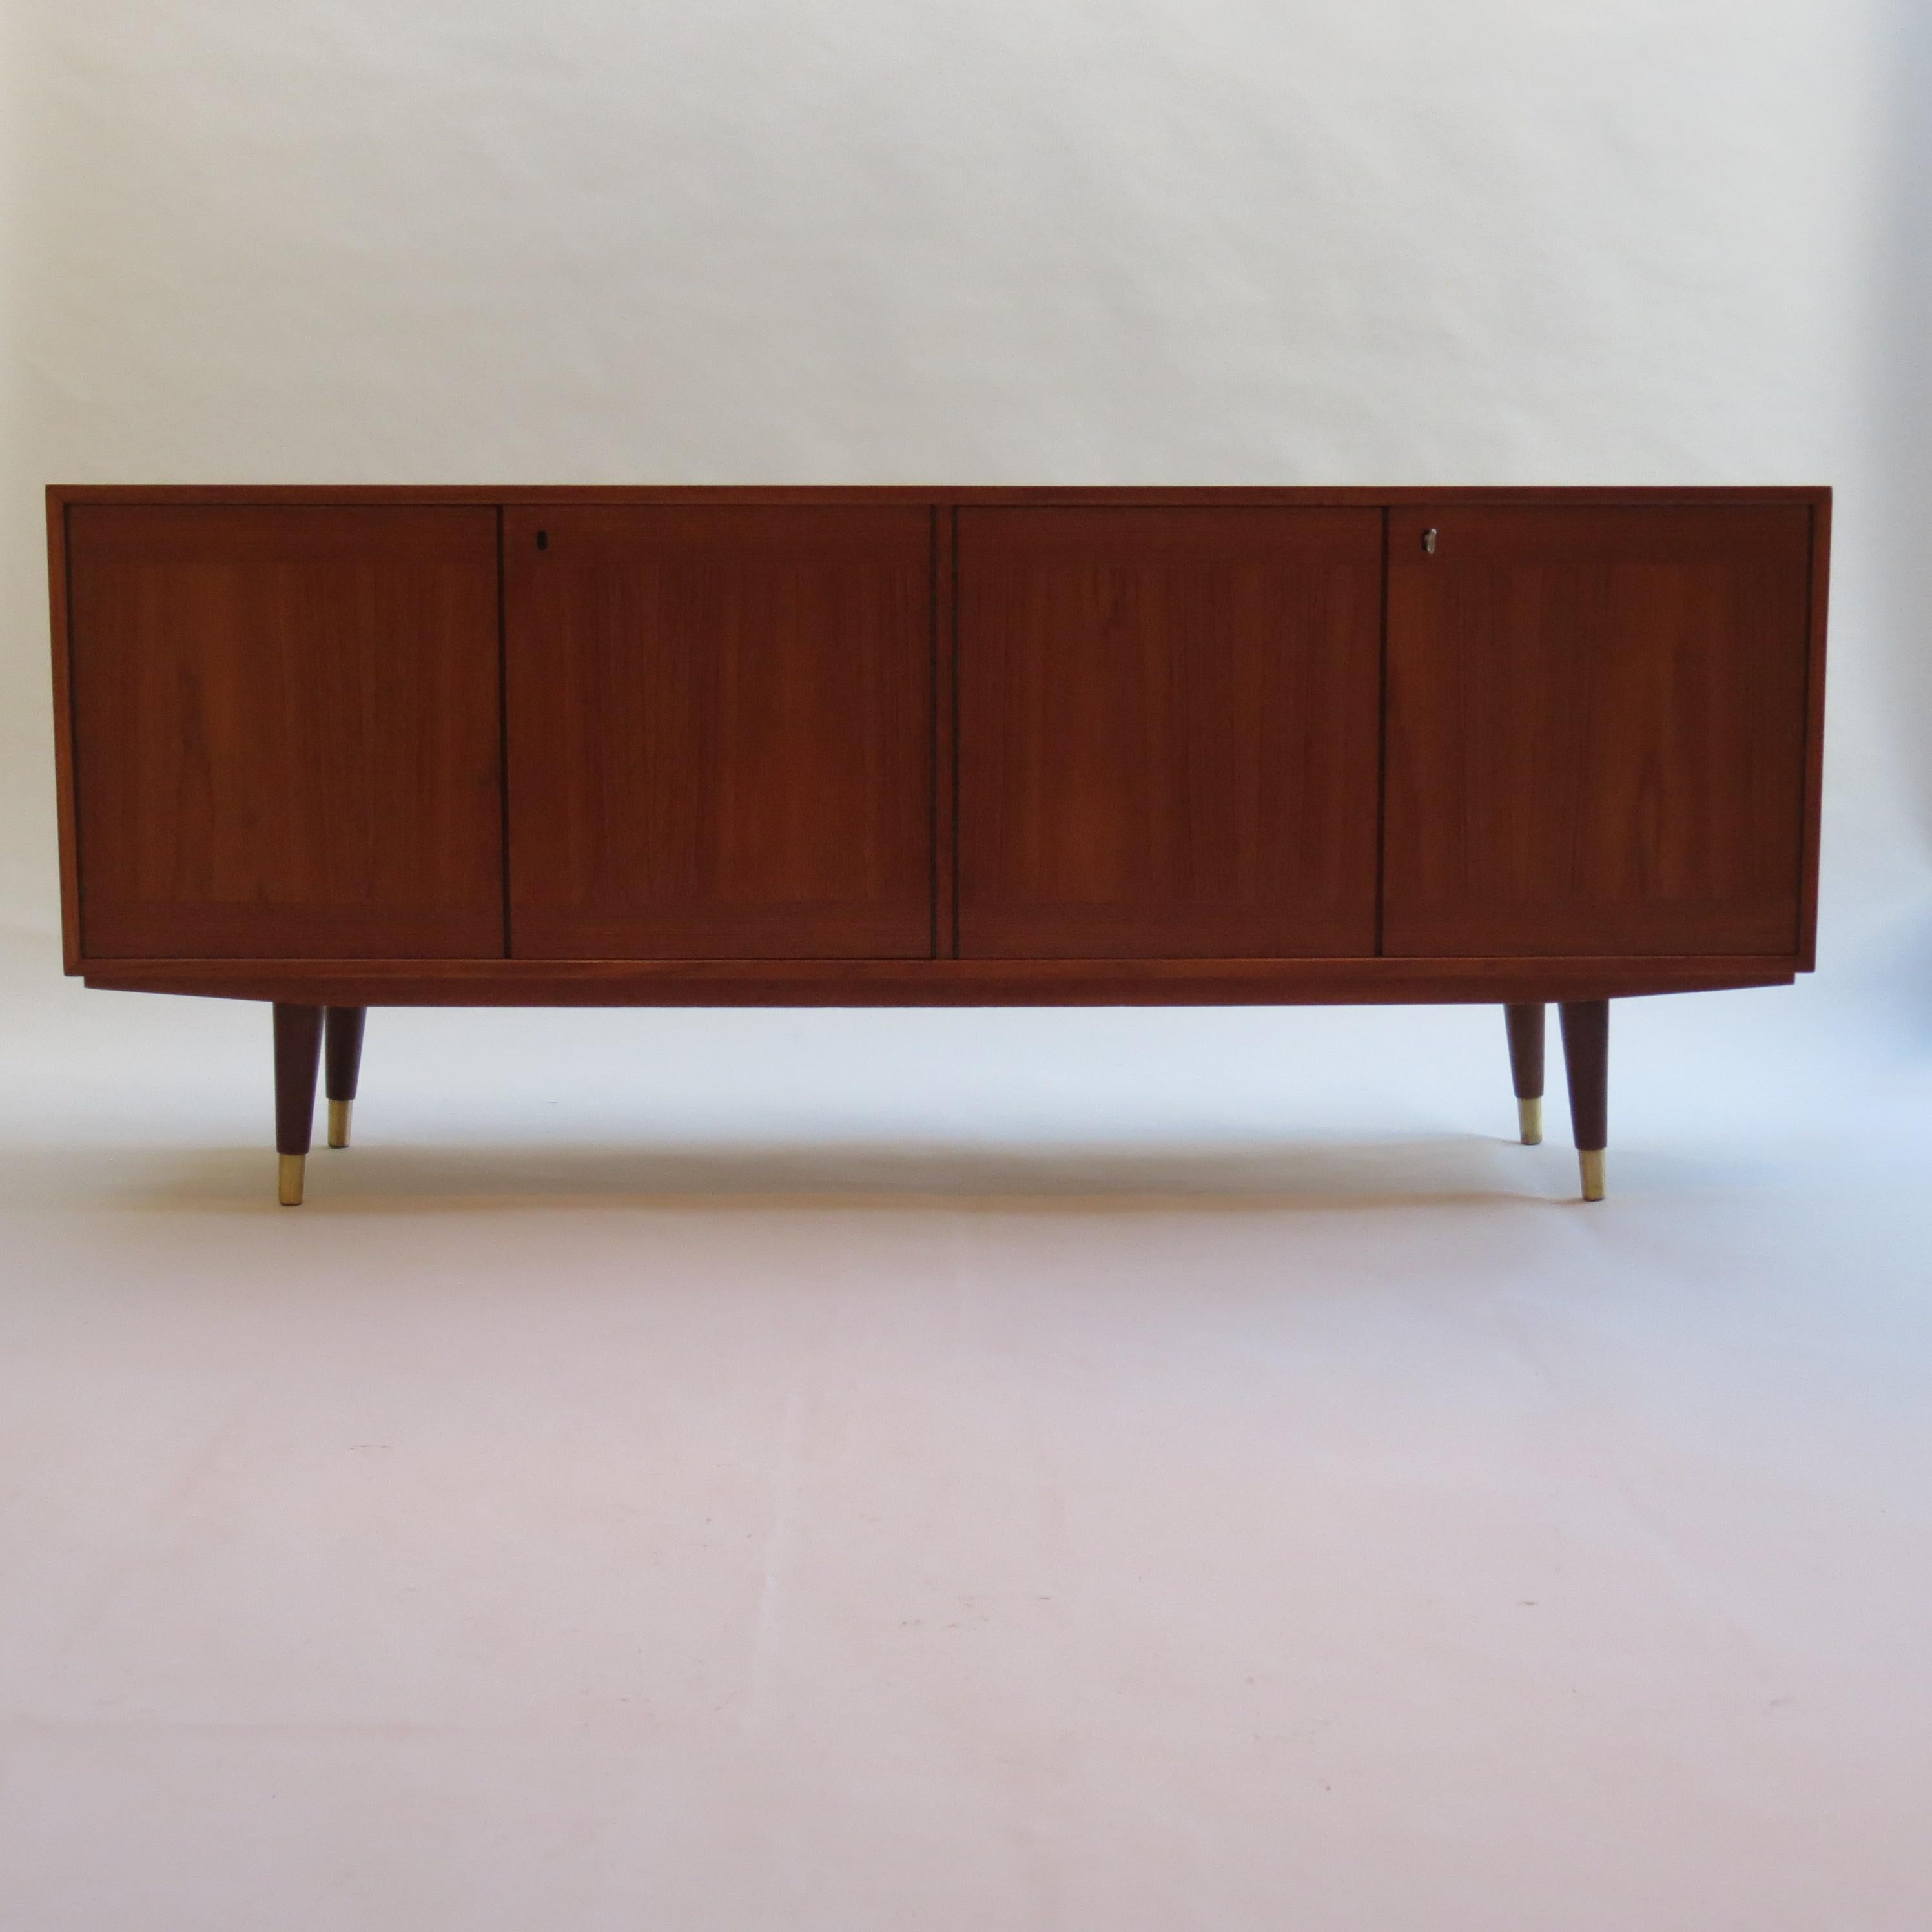 Midcentury Teak sideboard designed by Fredrik Kayser and manufactured by Gustav Bahus, Norway. 

Teak veneered case and doors with contrasting interior in Deal. Four opening doors reveal a removable shelf to one side and 3 internal drawers with